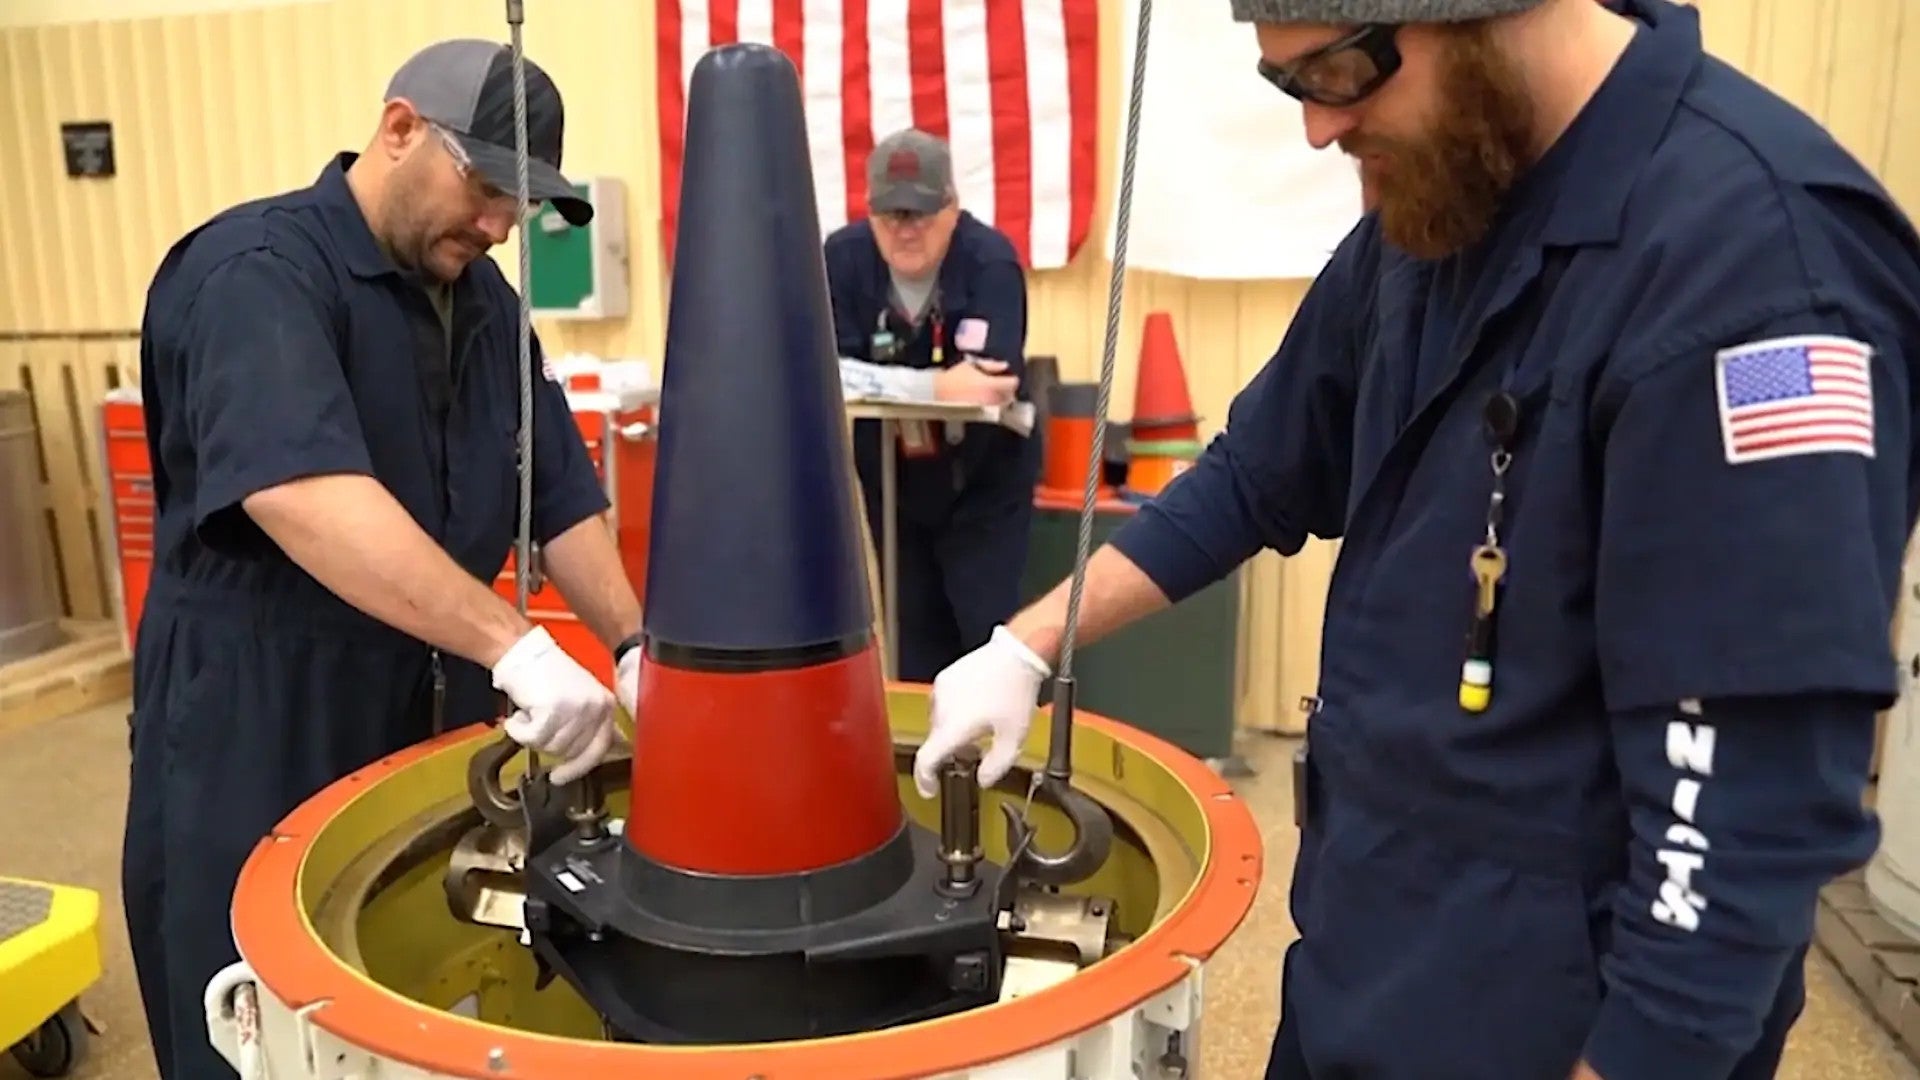 Personnel at the Pantex plant in Texas load a Mk 4A reentry vehicle containing a W76-1 warhead into a container for transport. The W76-2 warhead fits inside the same reentry vehicle., YouTube capture 